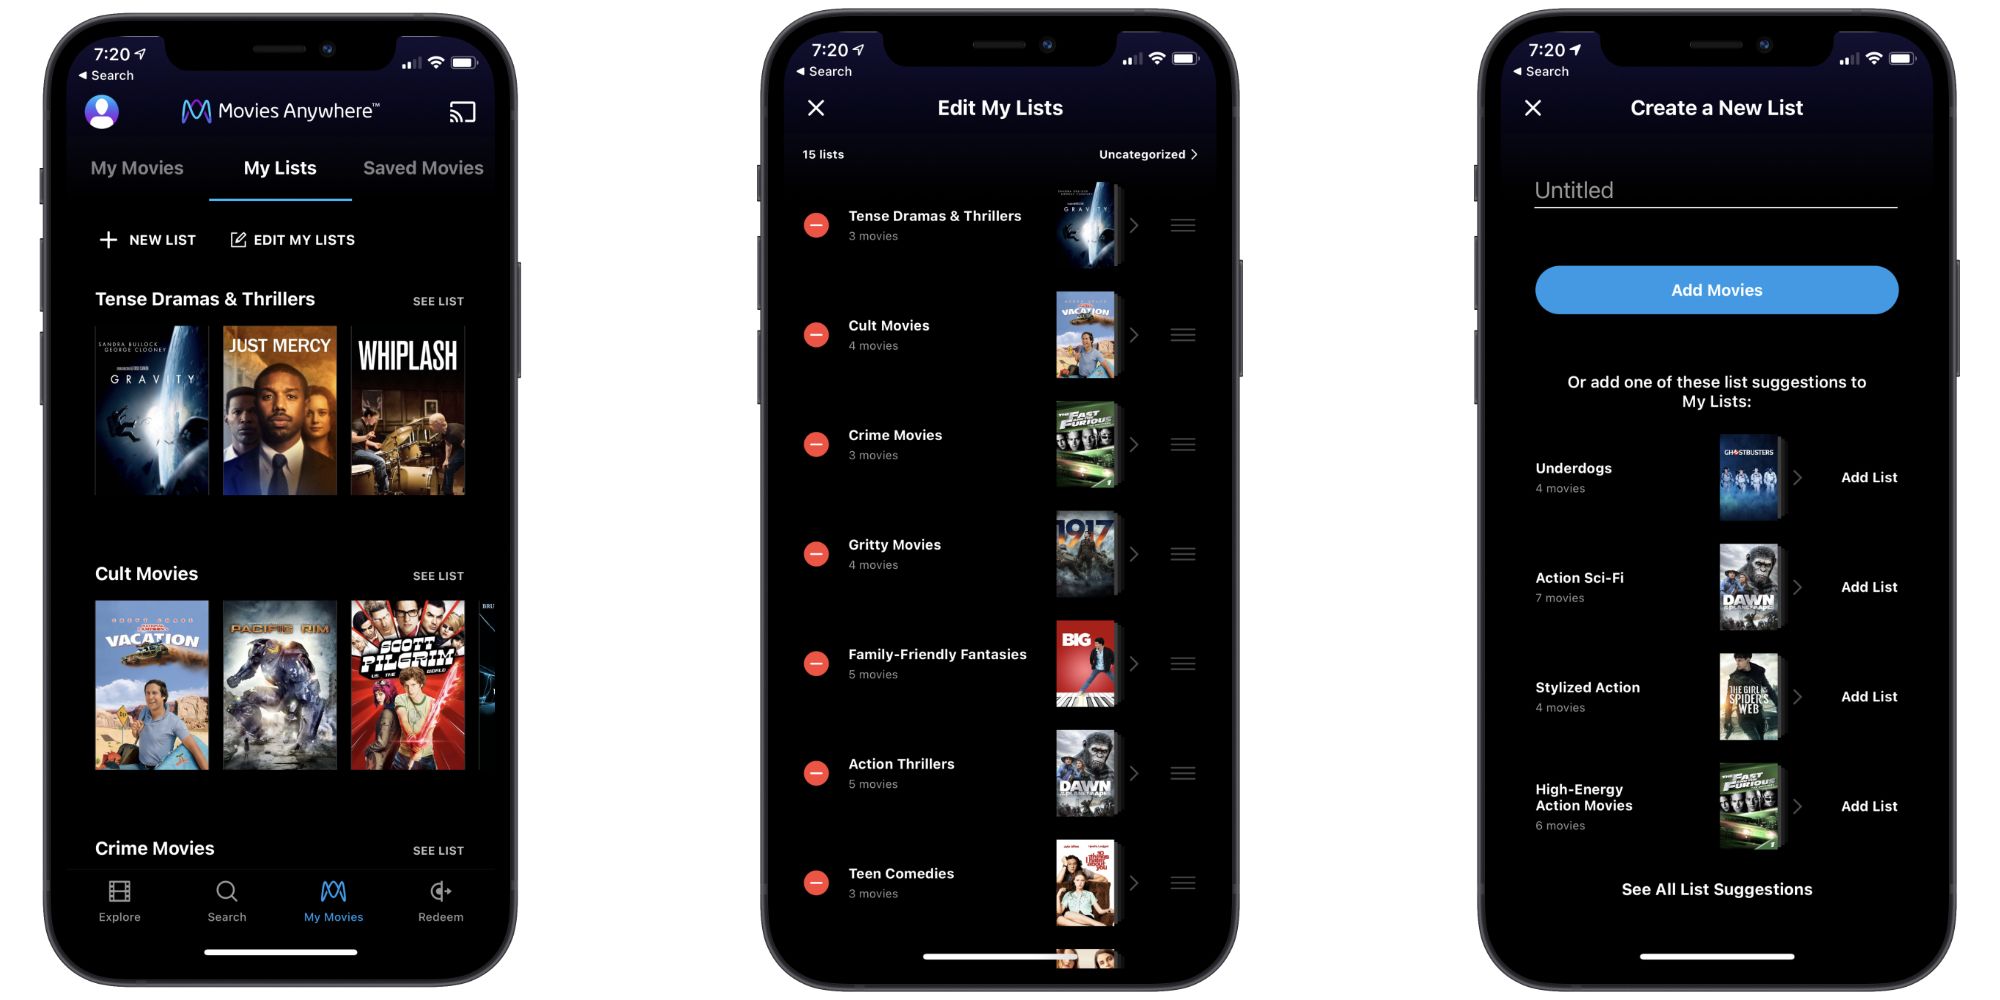 Movies Anywhere Now Uses AI To Help You Find The Best Movie To Watch